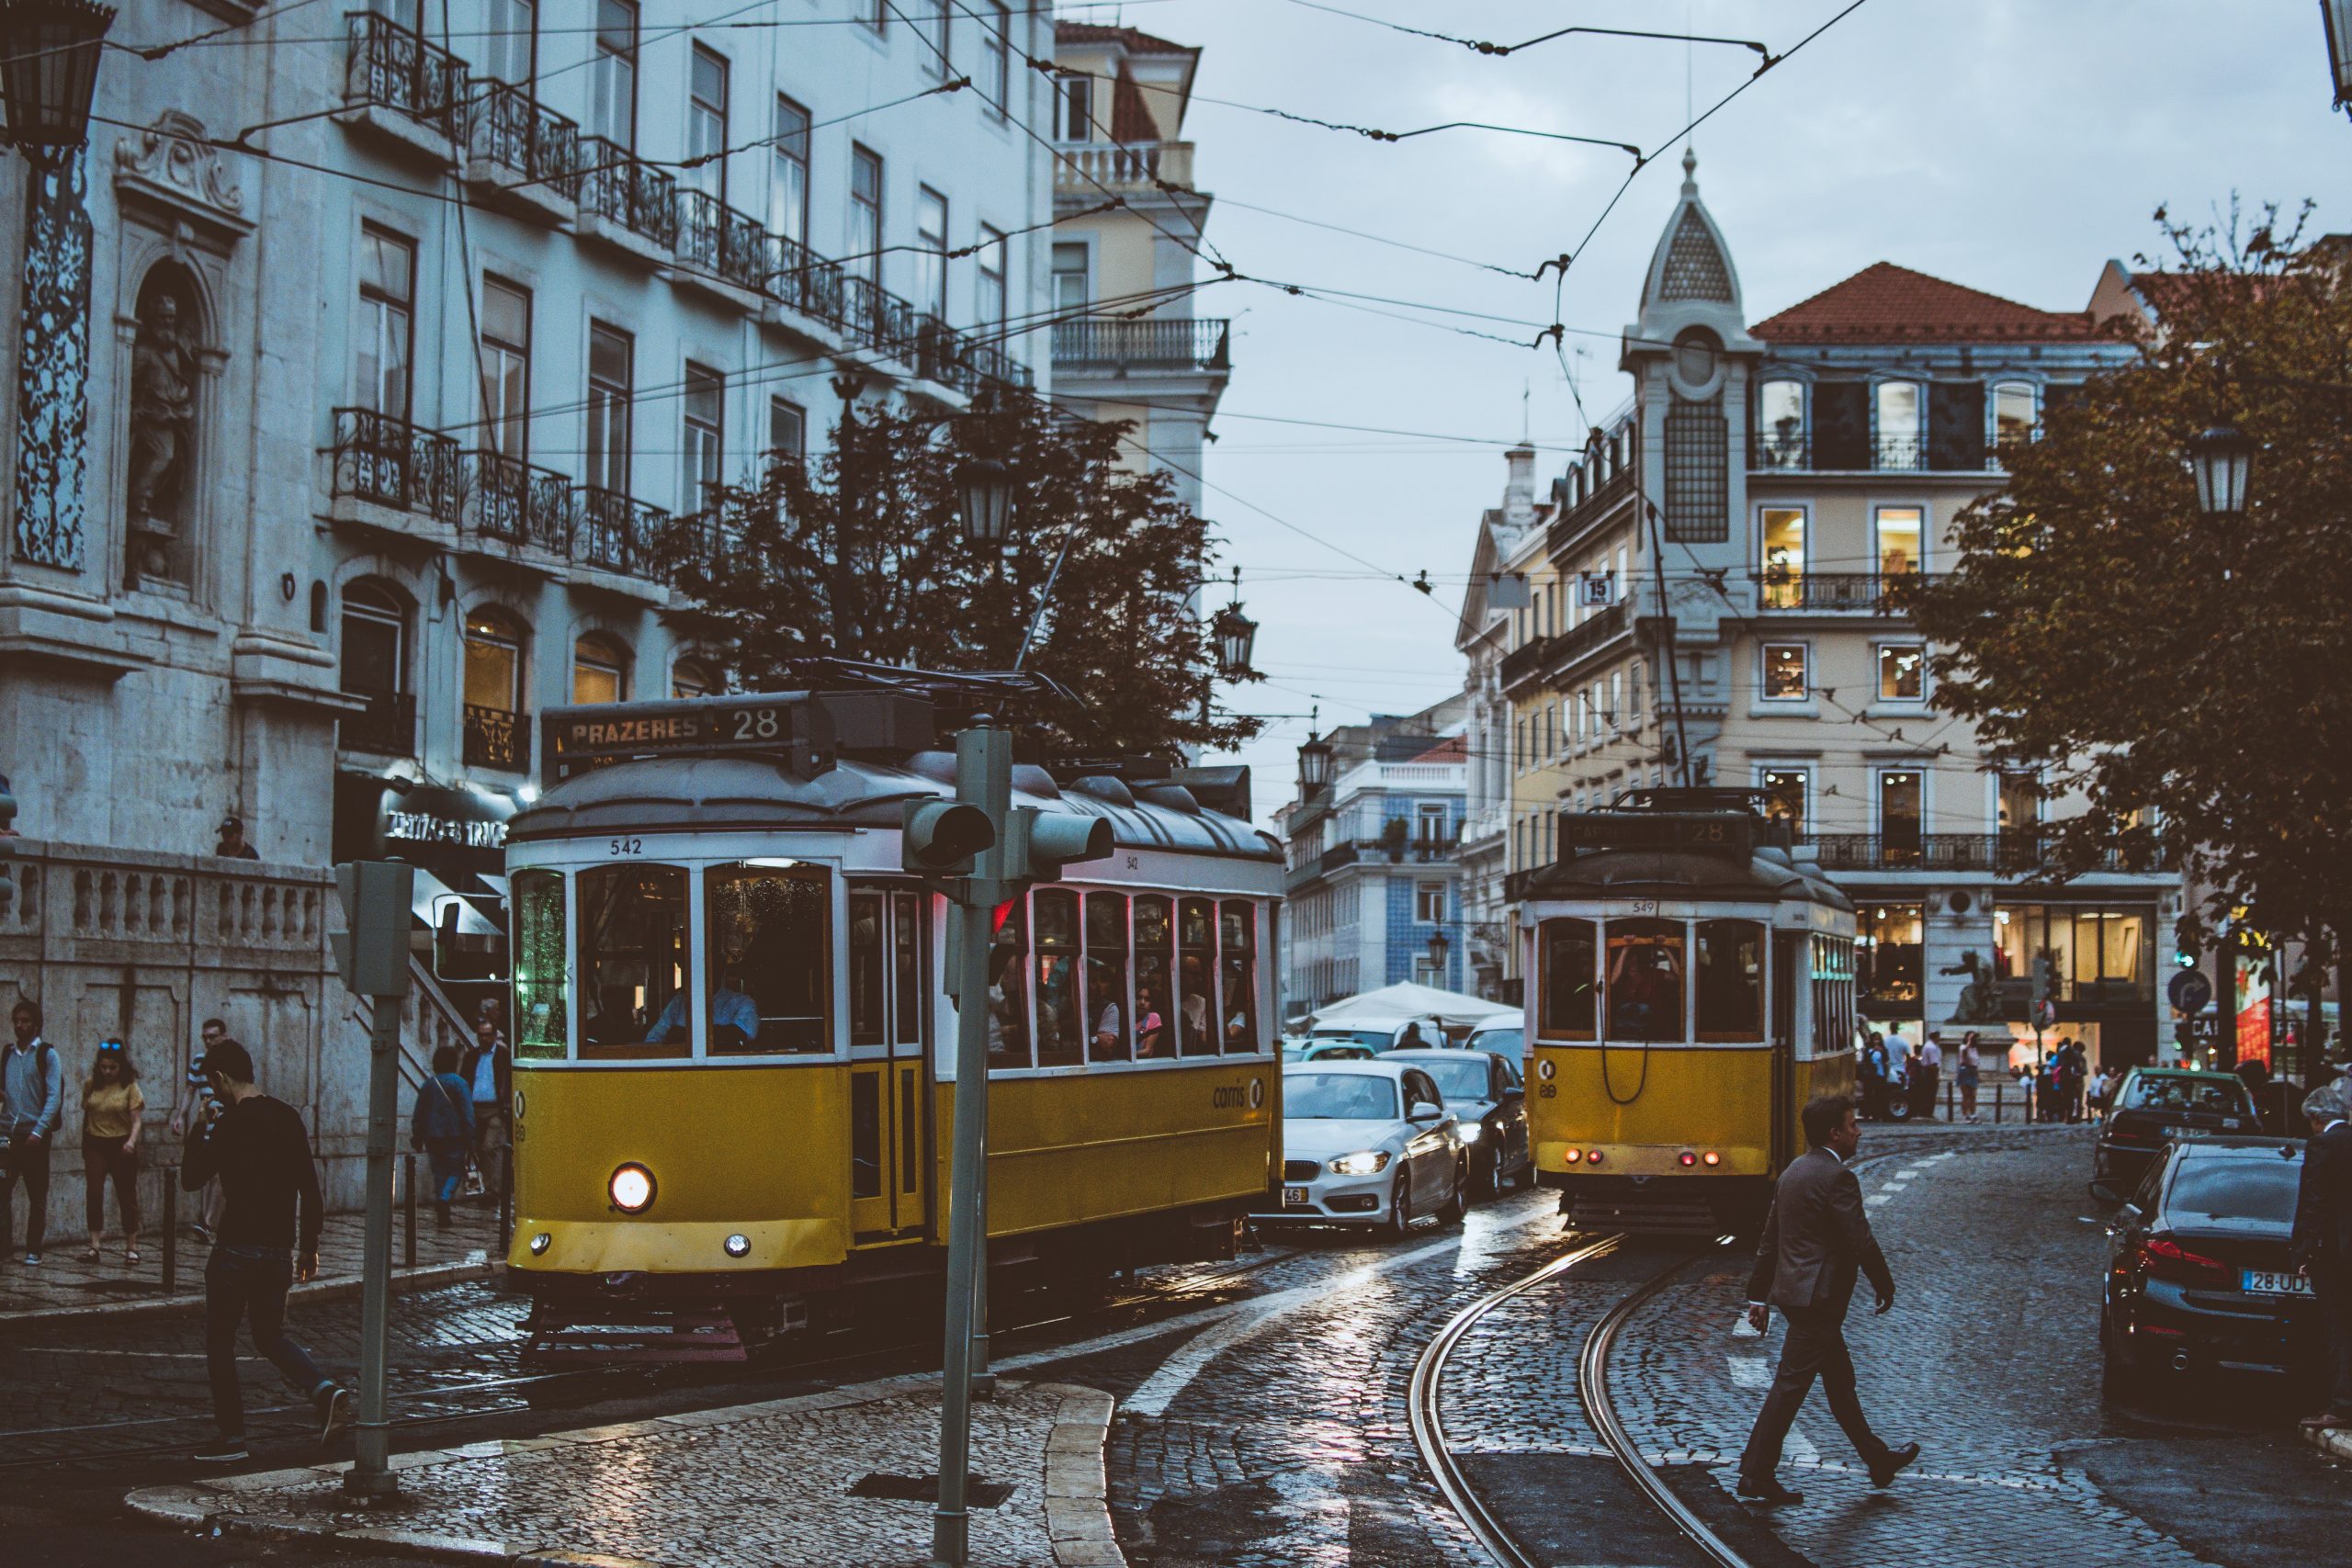 Two yellow trams on a street in Lisbon, known for its Best Coworking Spaces.